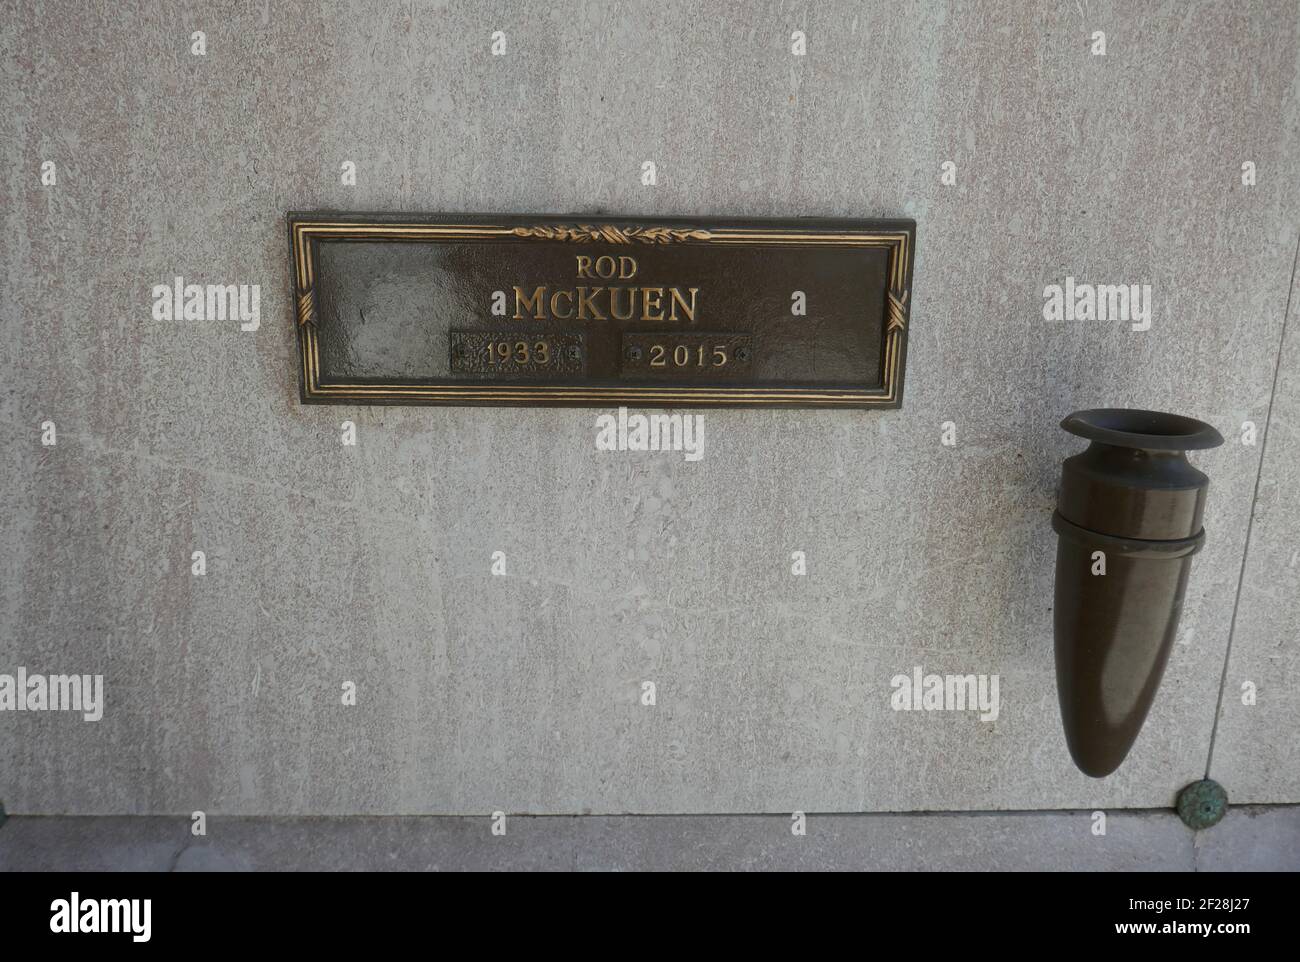 Los Angeles, California, USA 9th March 2021 A general view of atmosphere of poet/actor Rod McKuen's grave at Pierce Brothers Westwood Village Memorial Park on March 9, 2021 in Los Angeles, California, USA. Photo by Barry King/Alamy Stock Photo Stock Photo